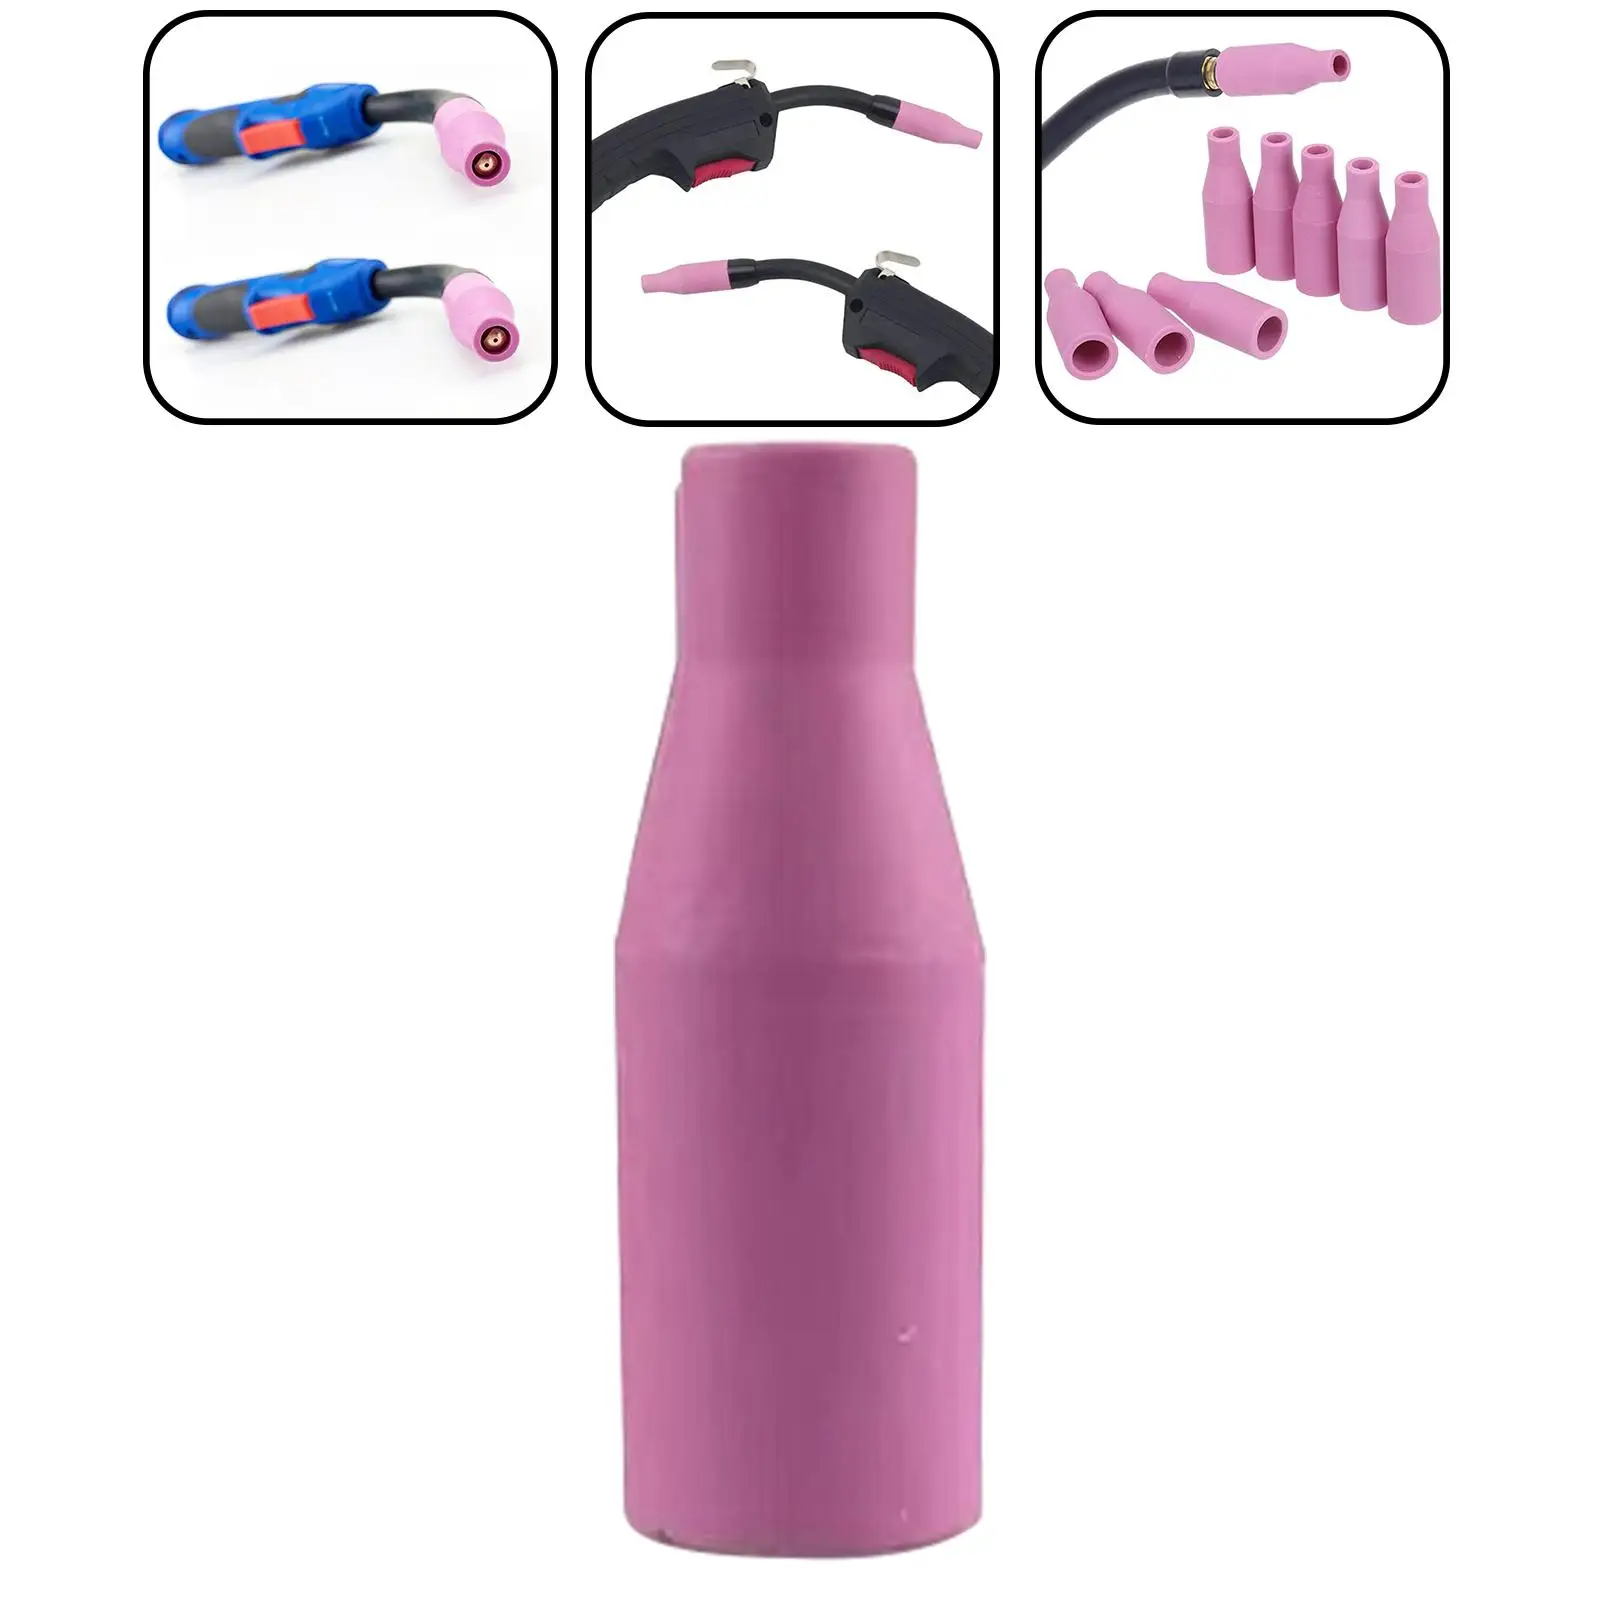 Welding Torch Nozzle Accessory Wear Resistance Thicken Ceramics for 15AK